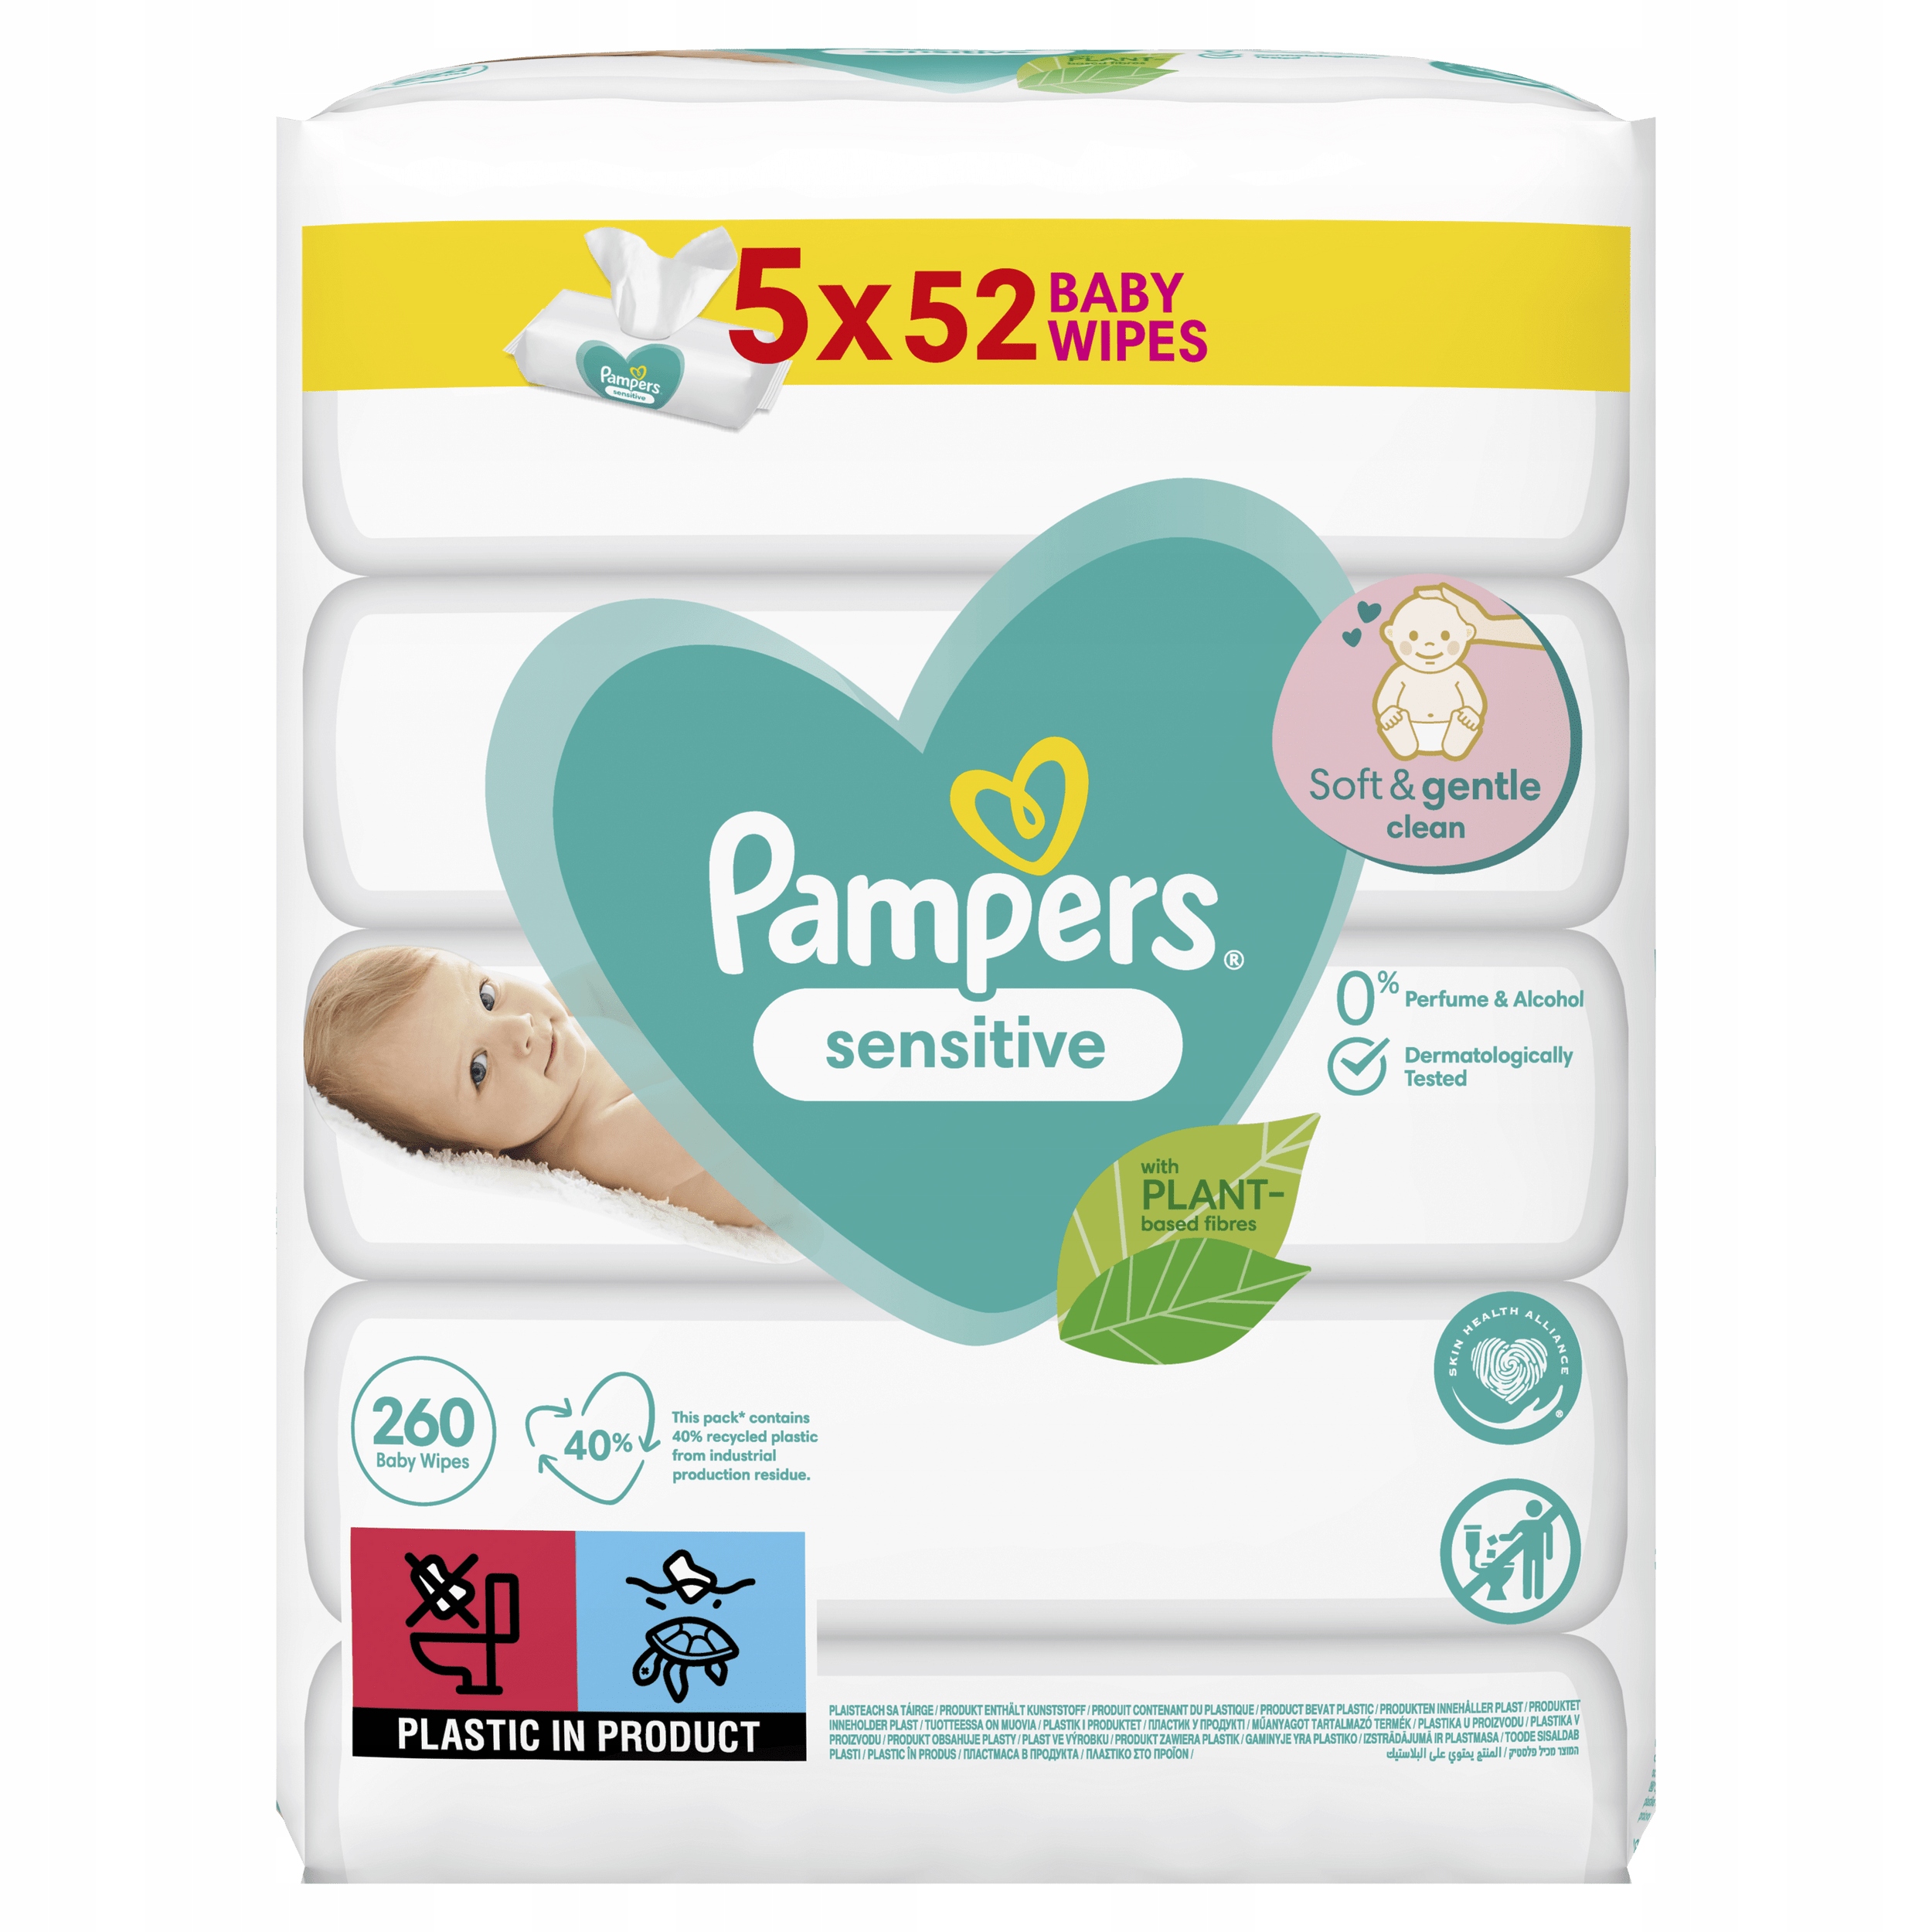 pampers active baby 5 54 szt